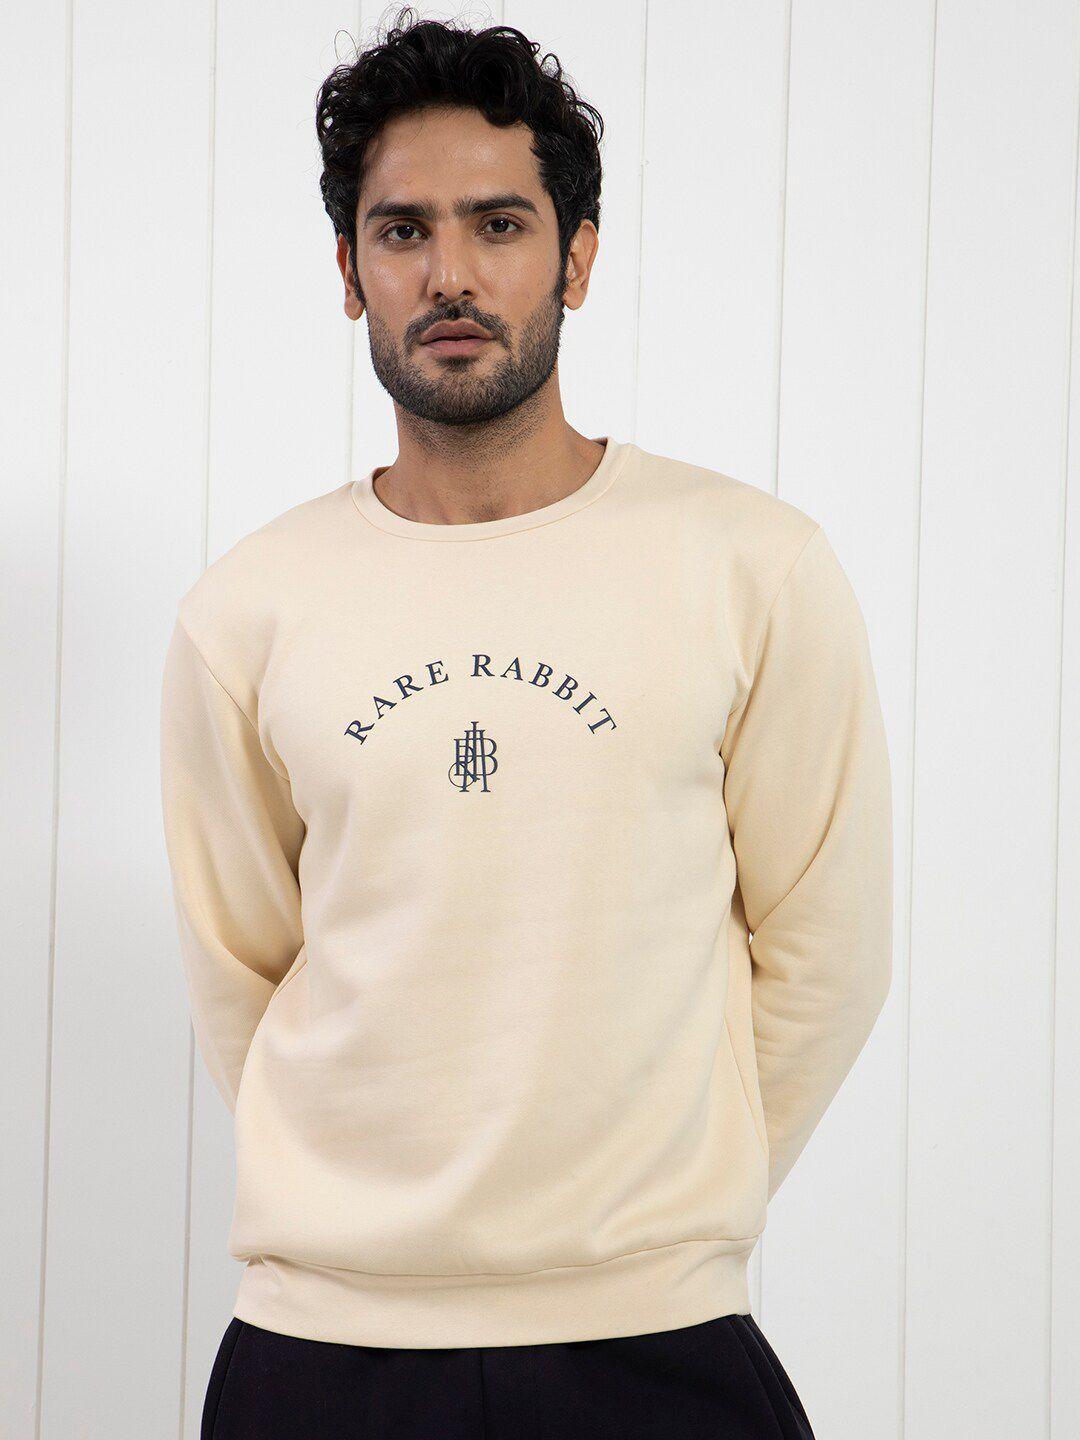 rare rabbit long sleeves typography printed cotton pullover